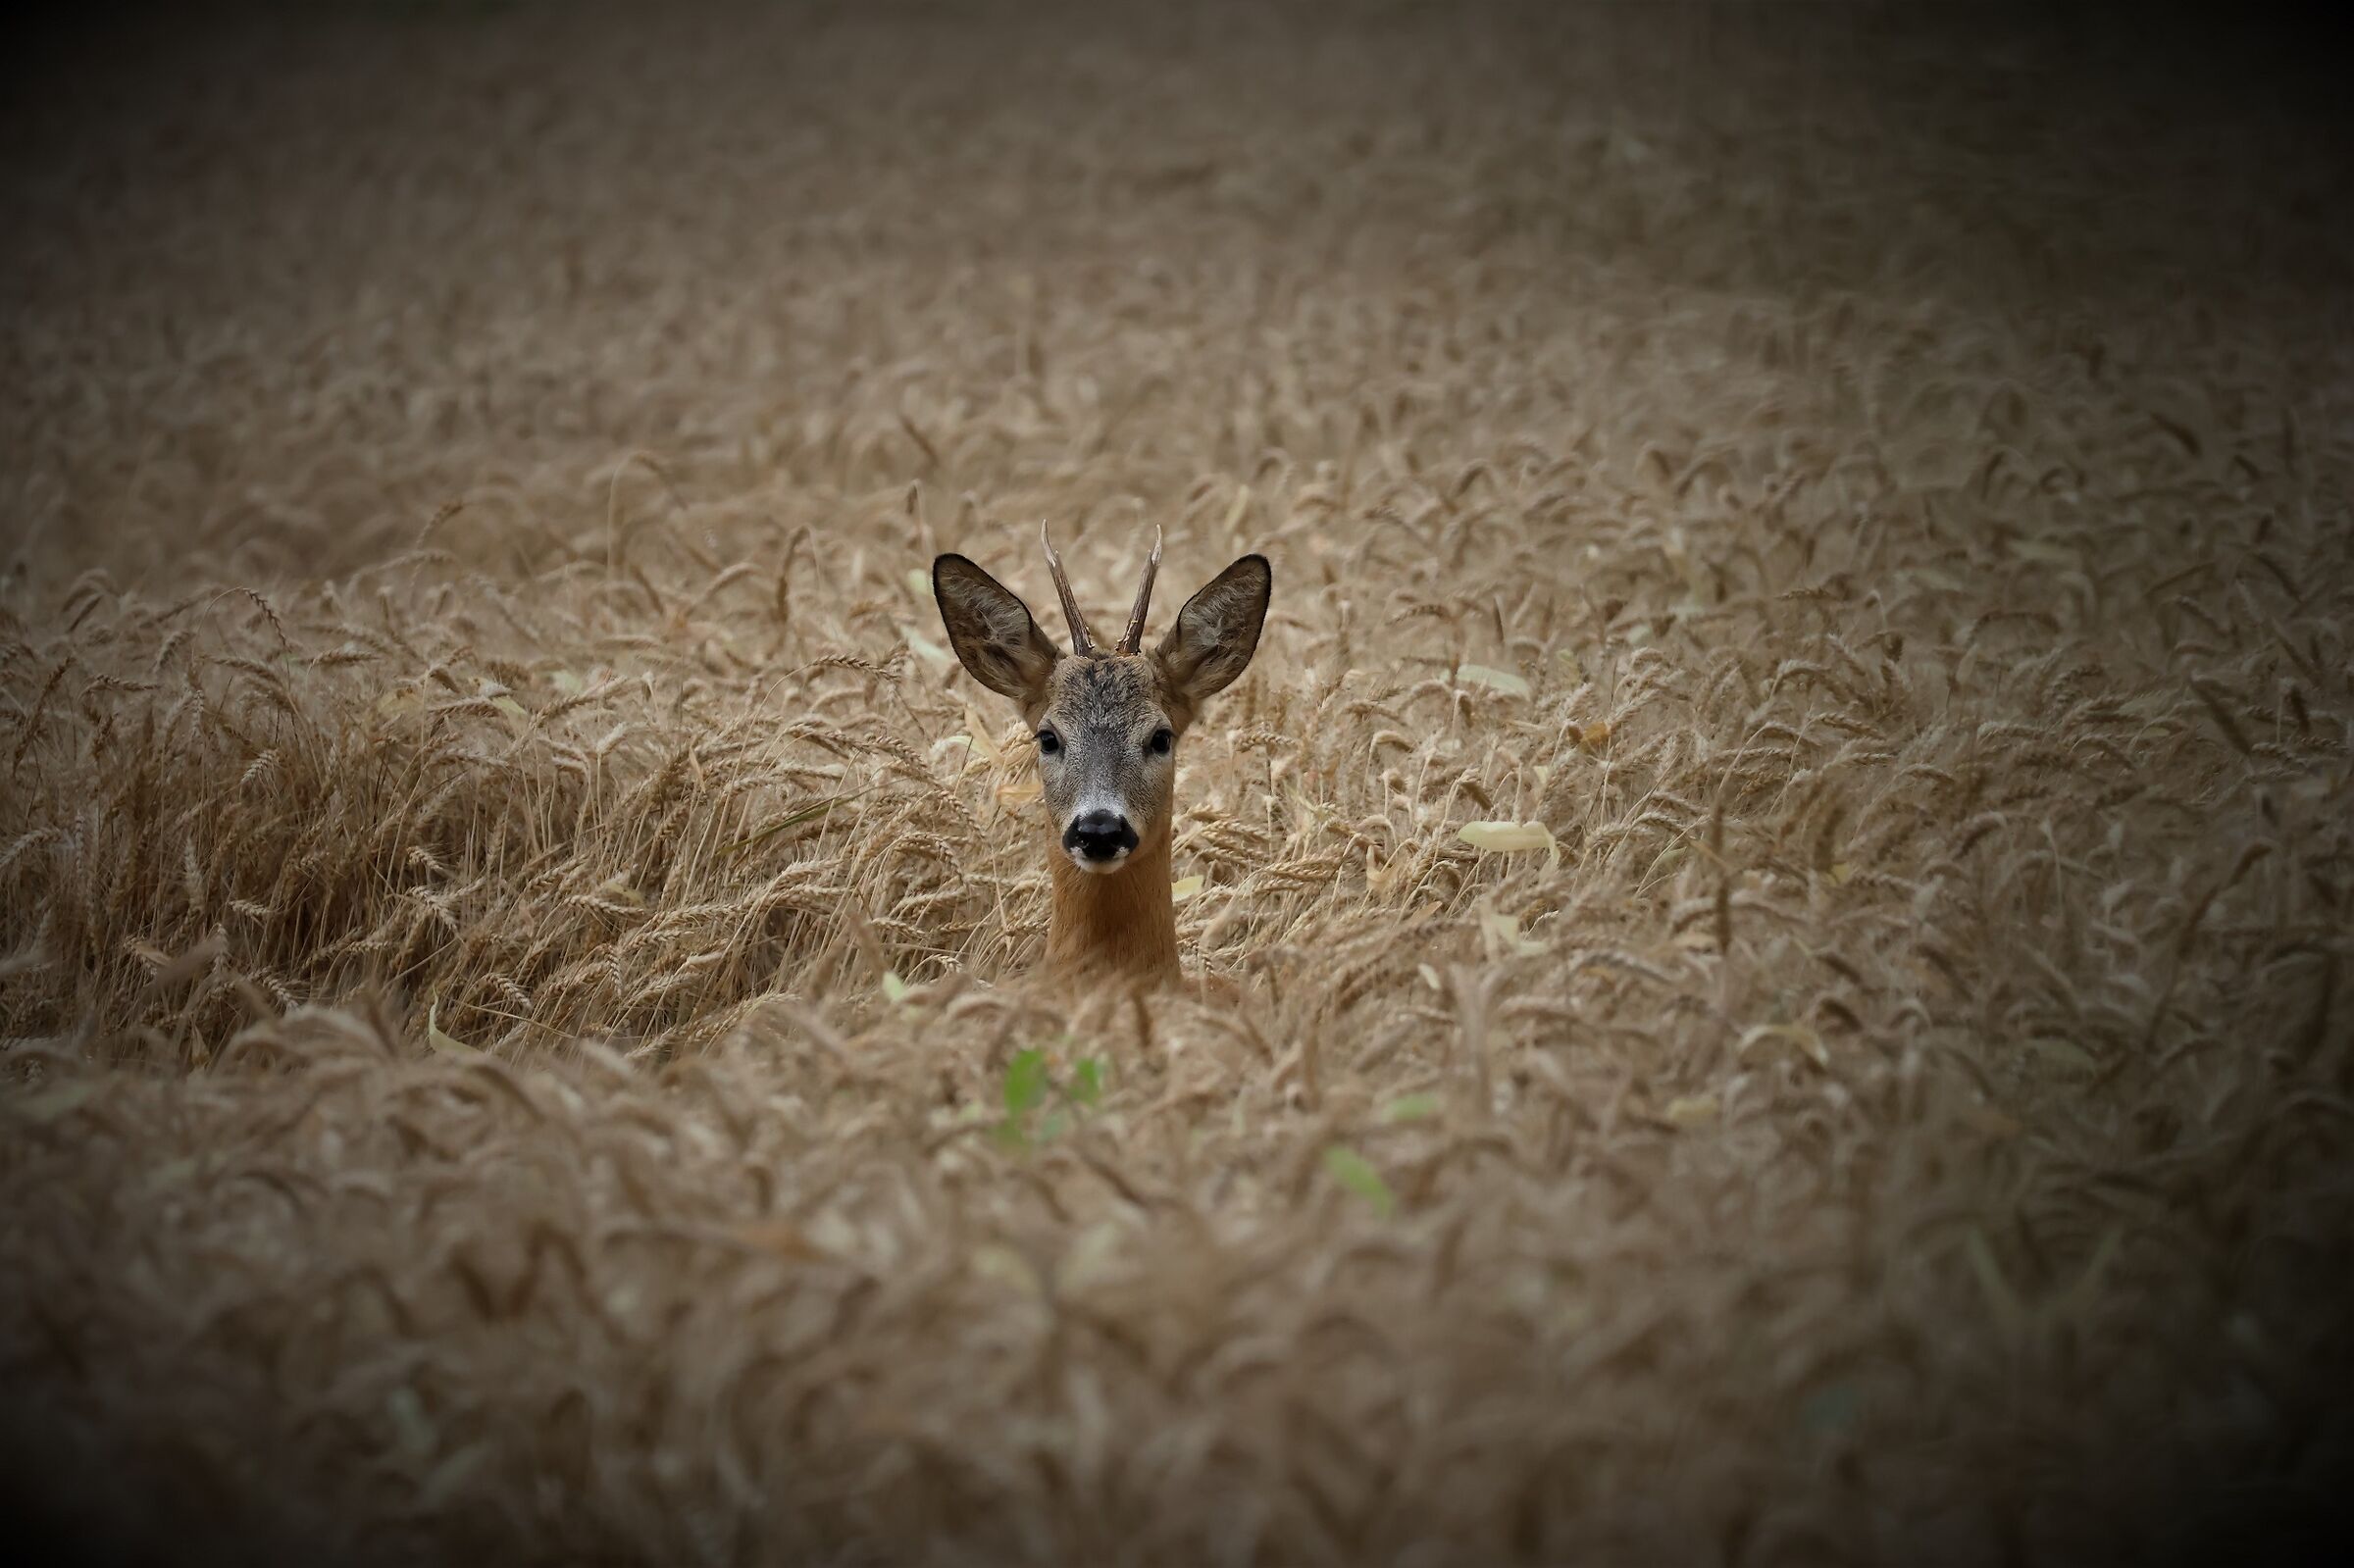 ... I seemed to see a roe deer ......